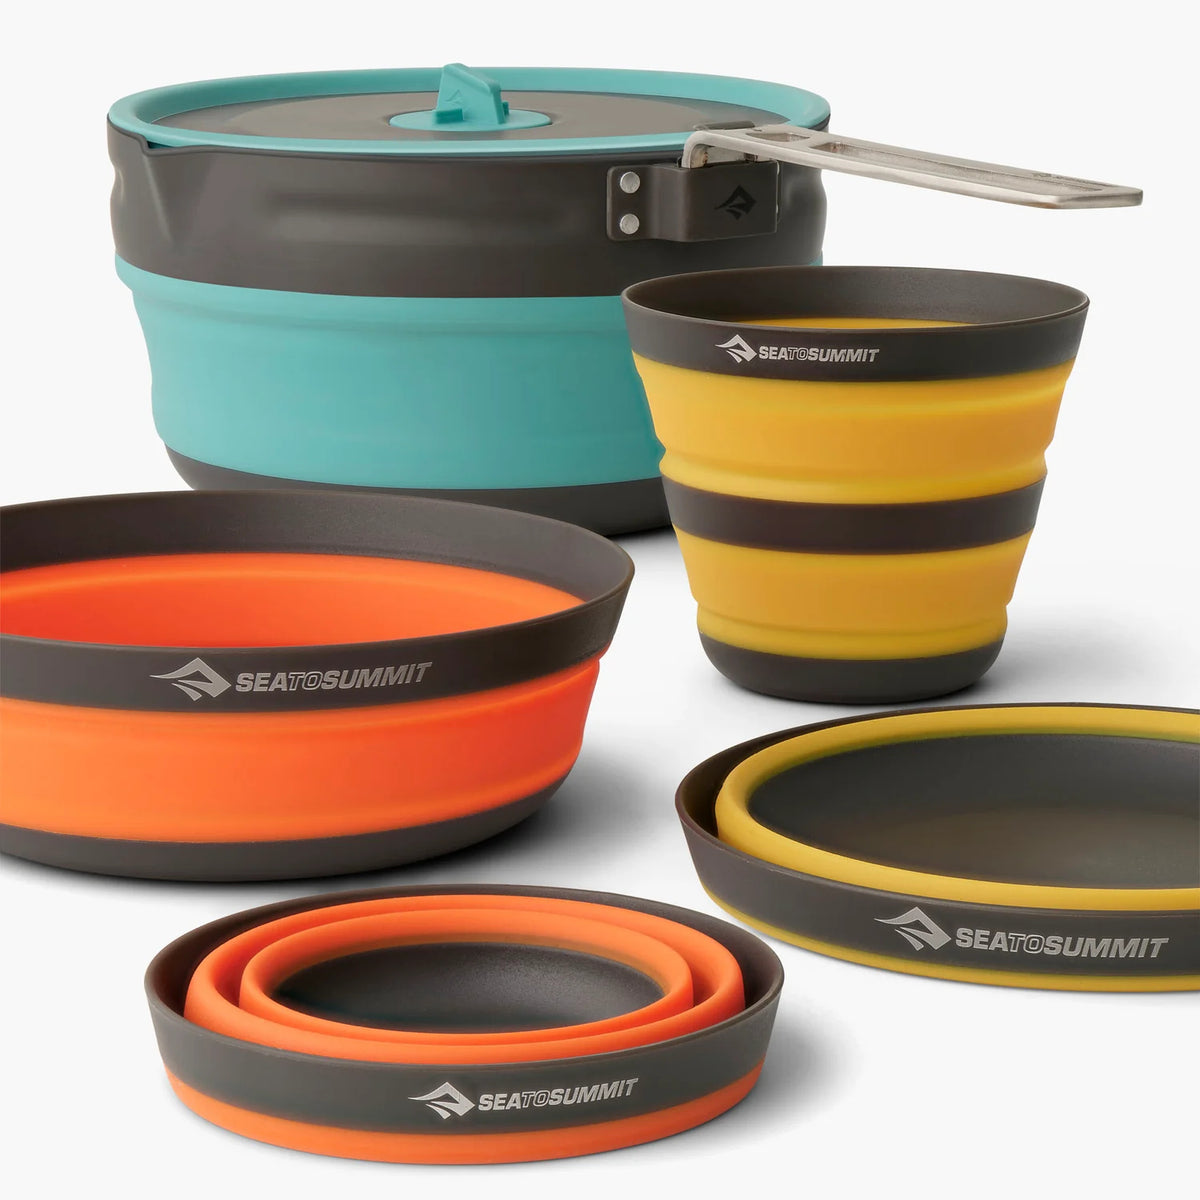 Sea to Summit Frontier Ultralight Collapsible One Pot Cook Set (2 Person, 5 Piece)